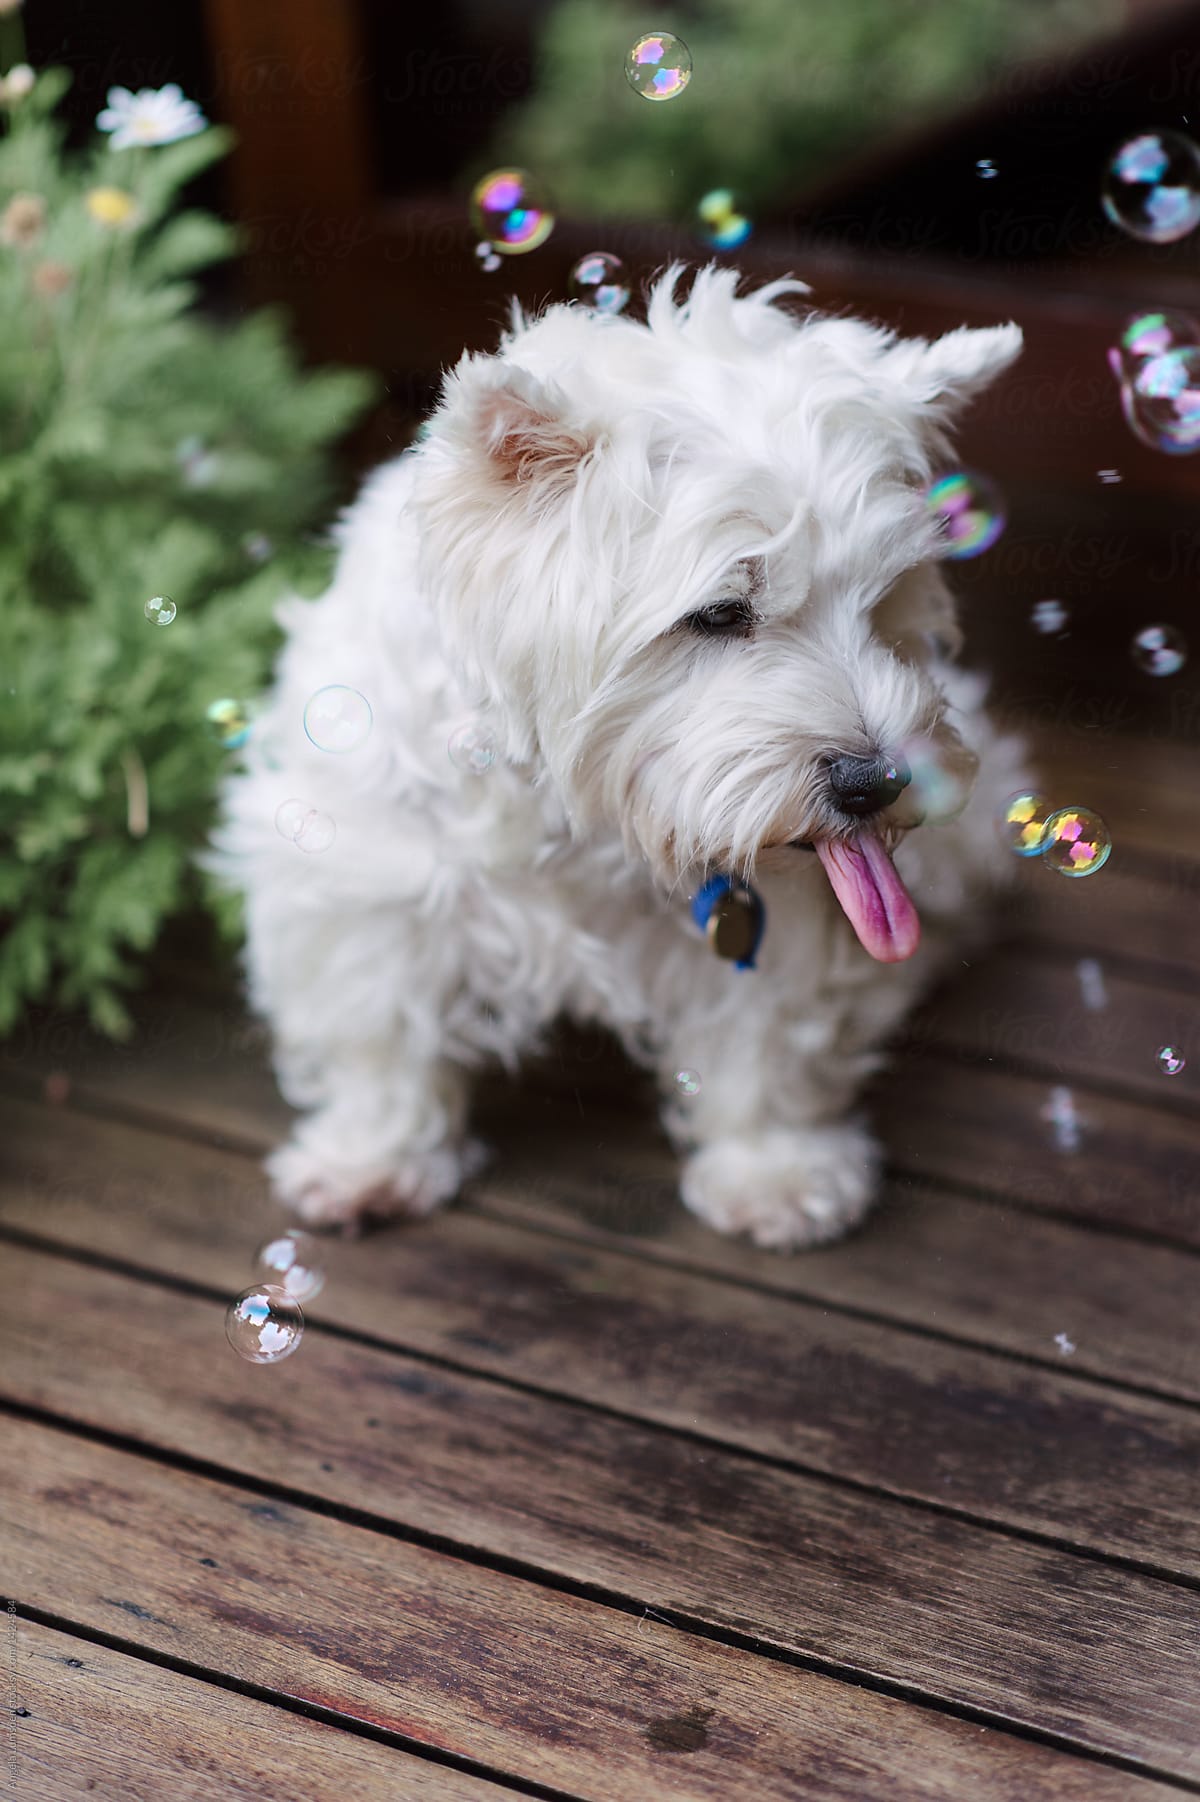 West highland terrier dog with bubbles outdoors